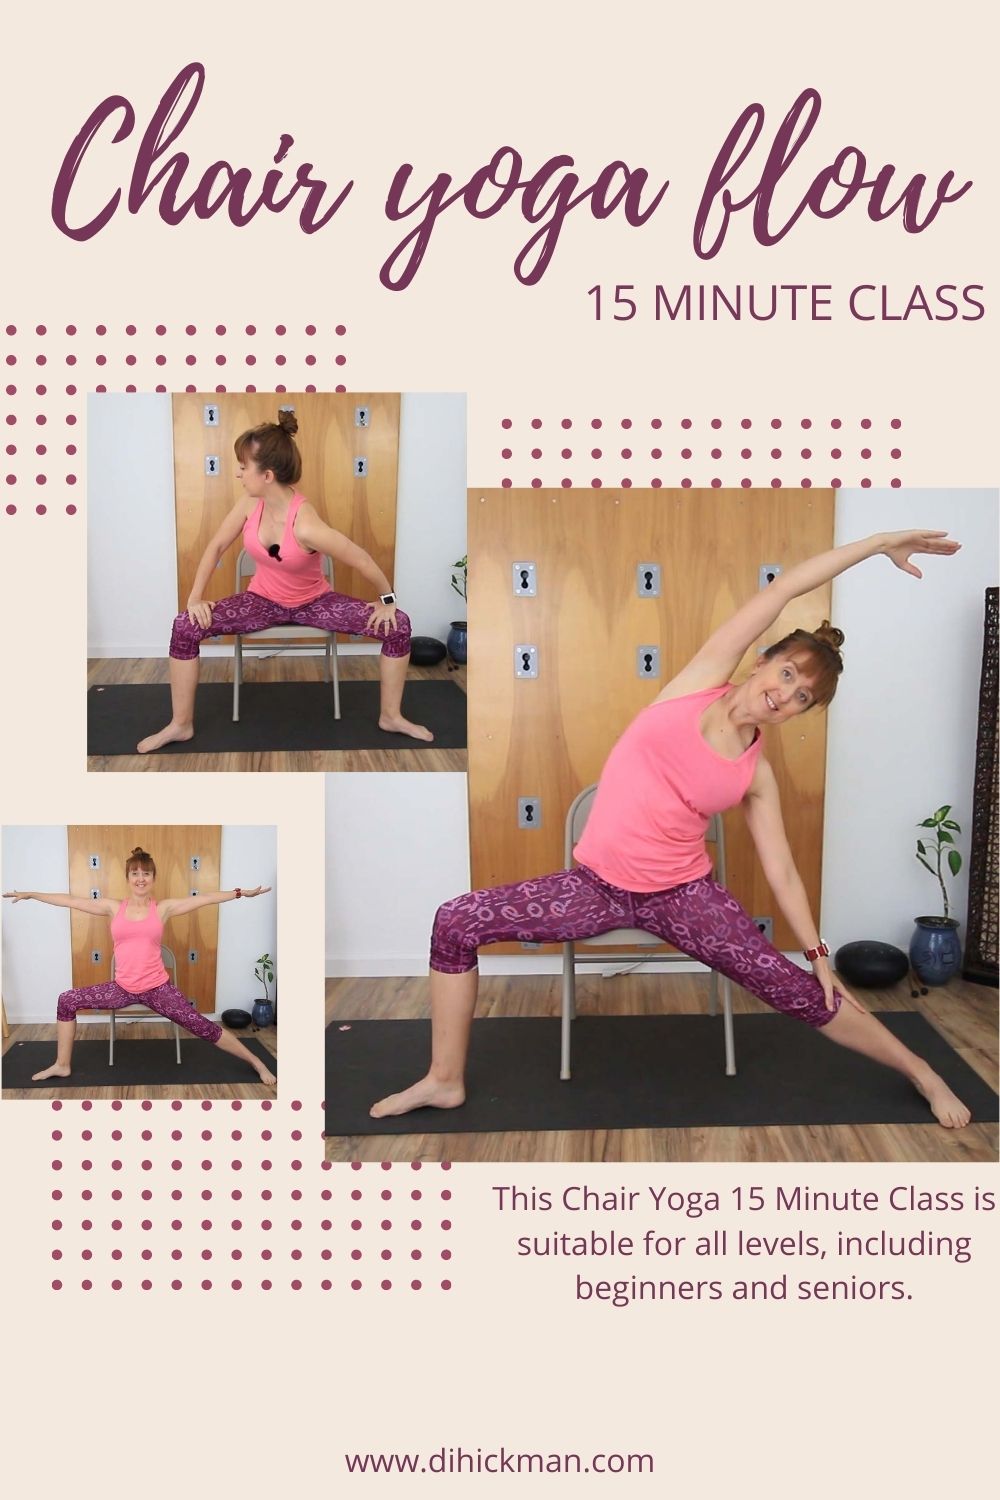 7 Chair Yoga Poses for All Abilities - Yoga with Kassandra Blog